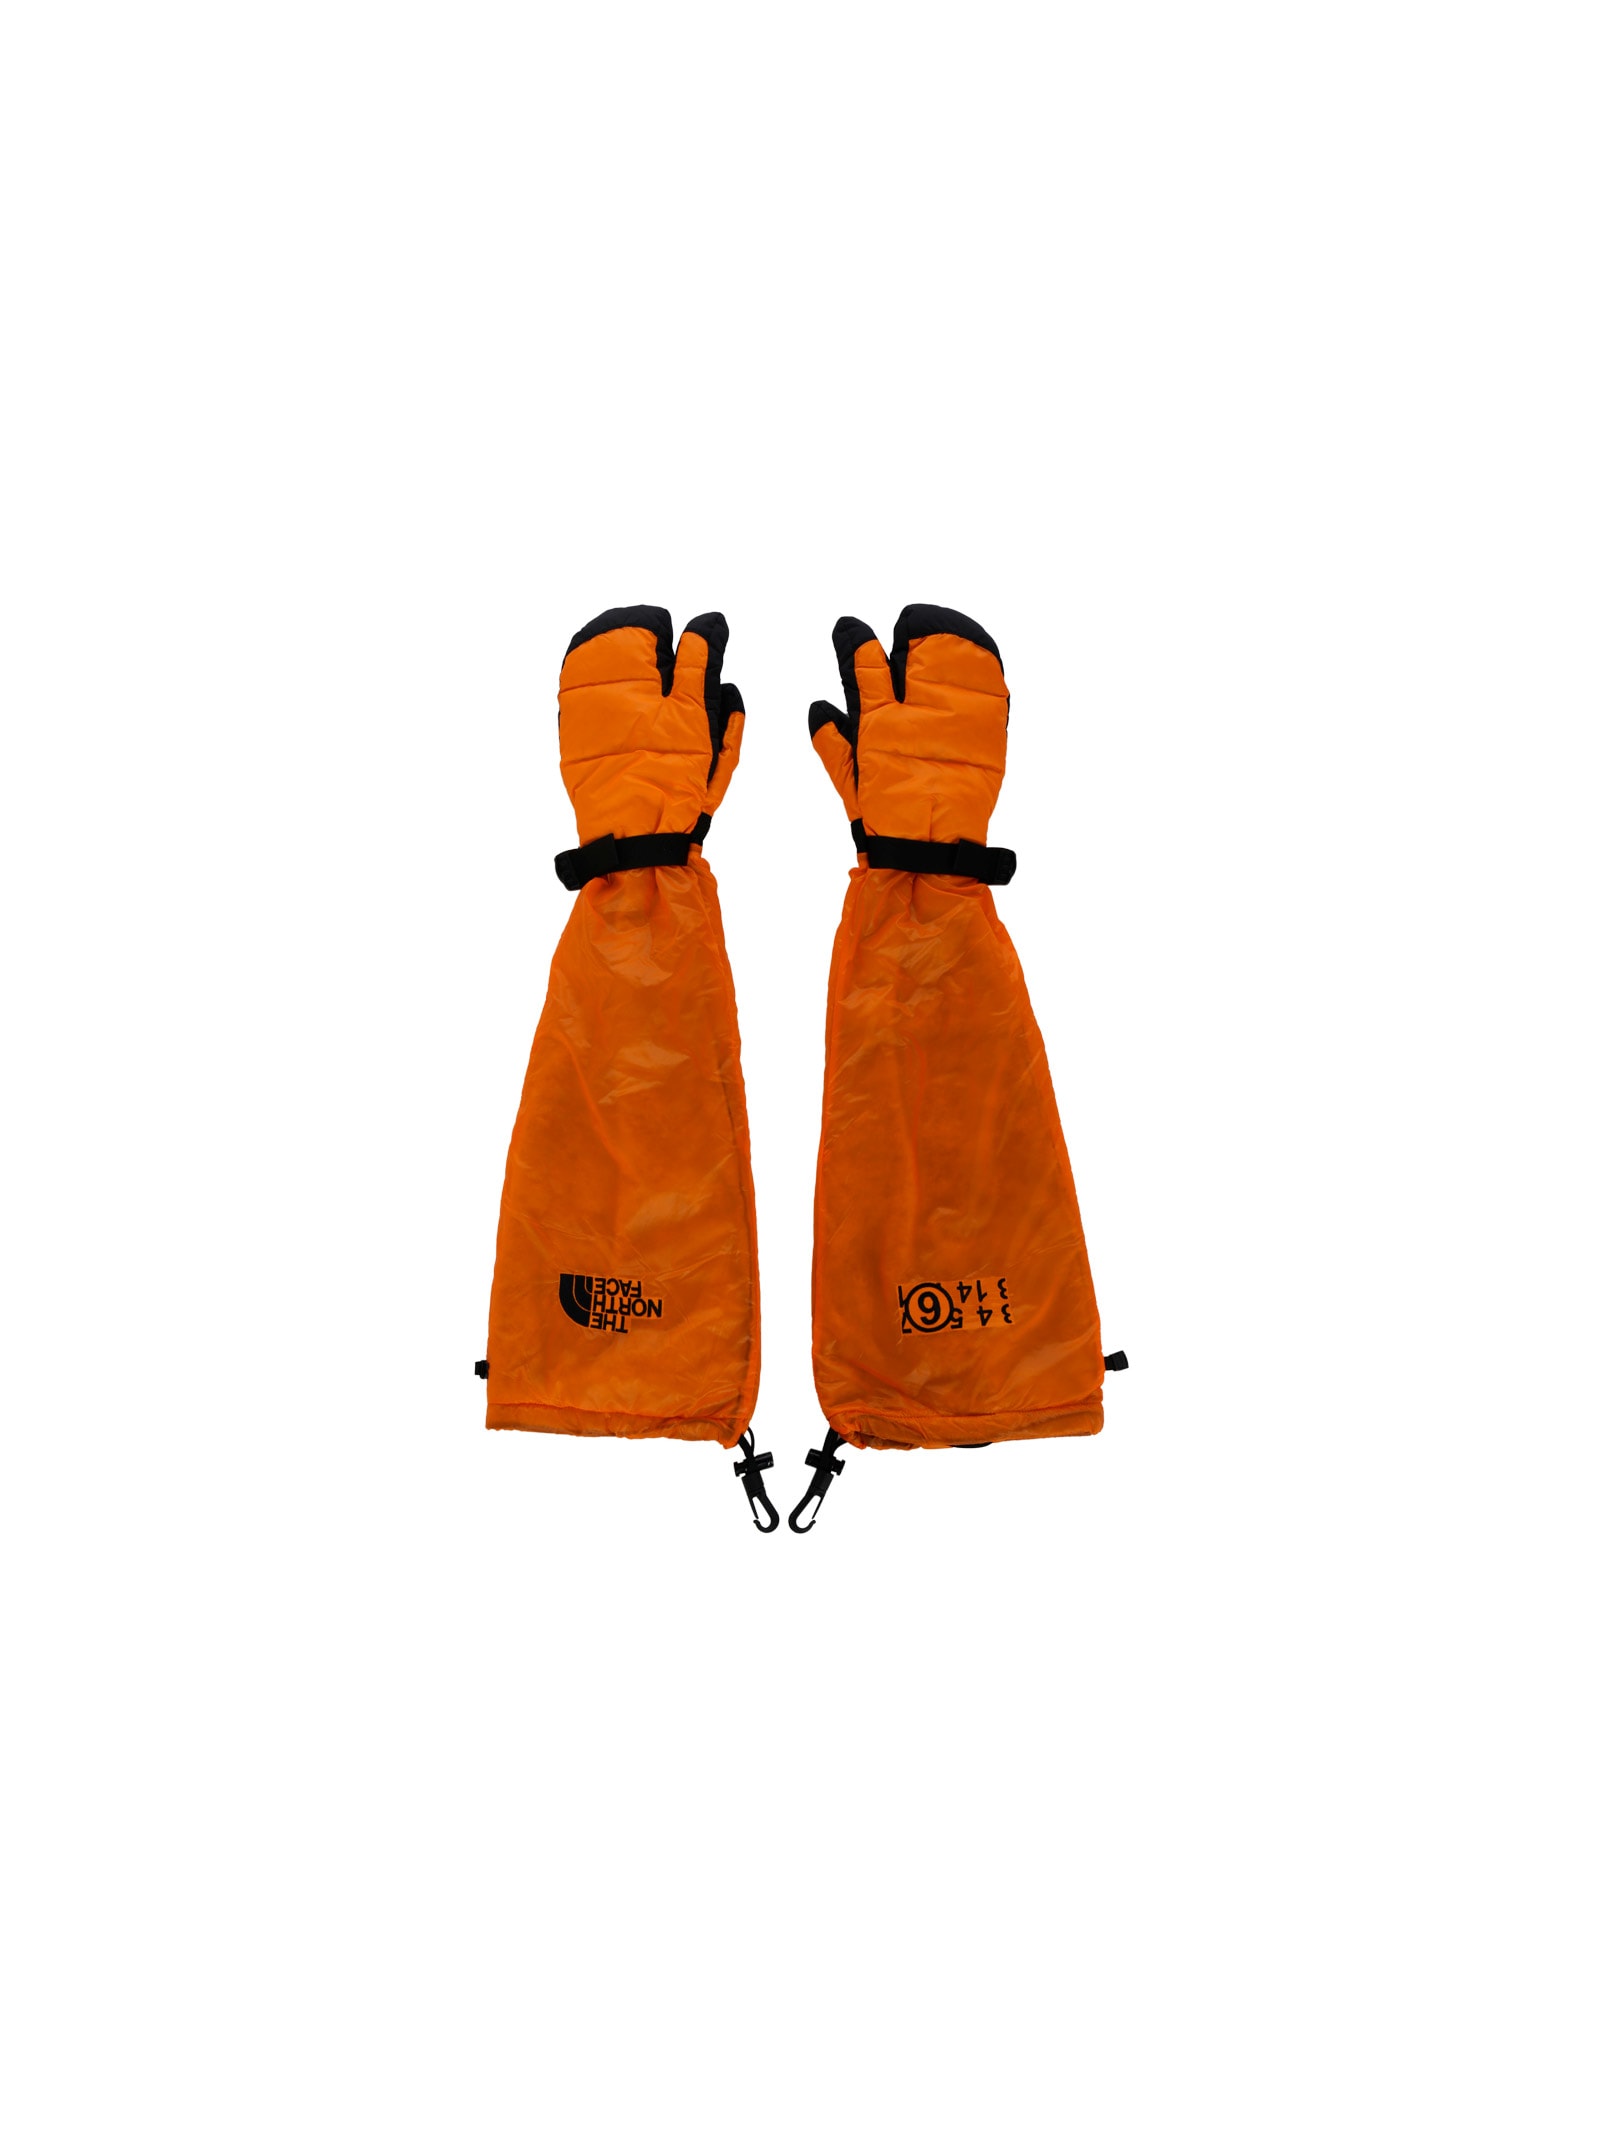 Mm6 X The North Face Gloves